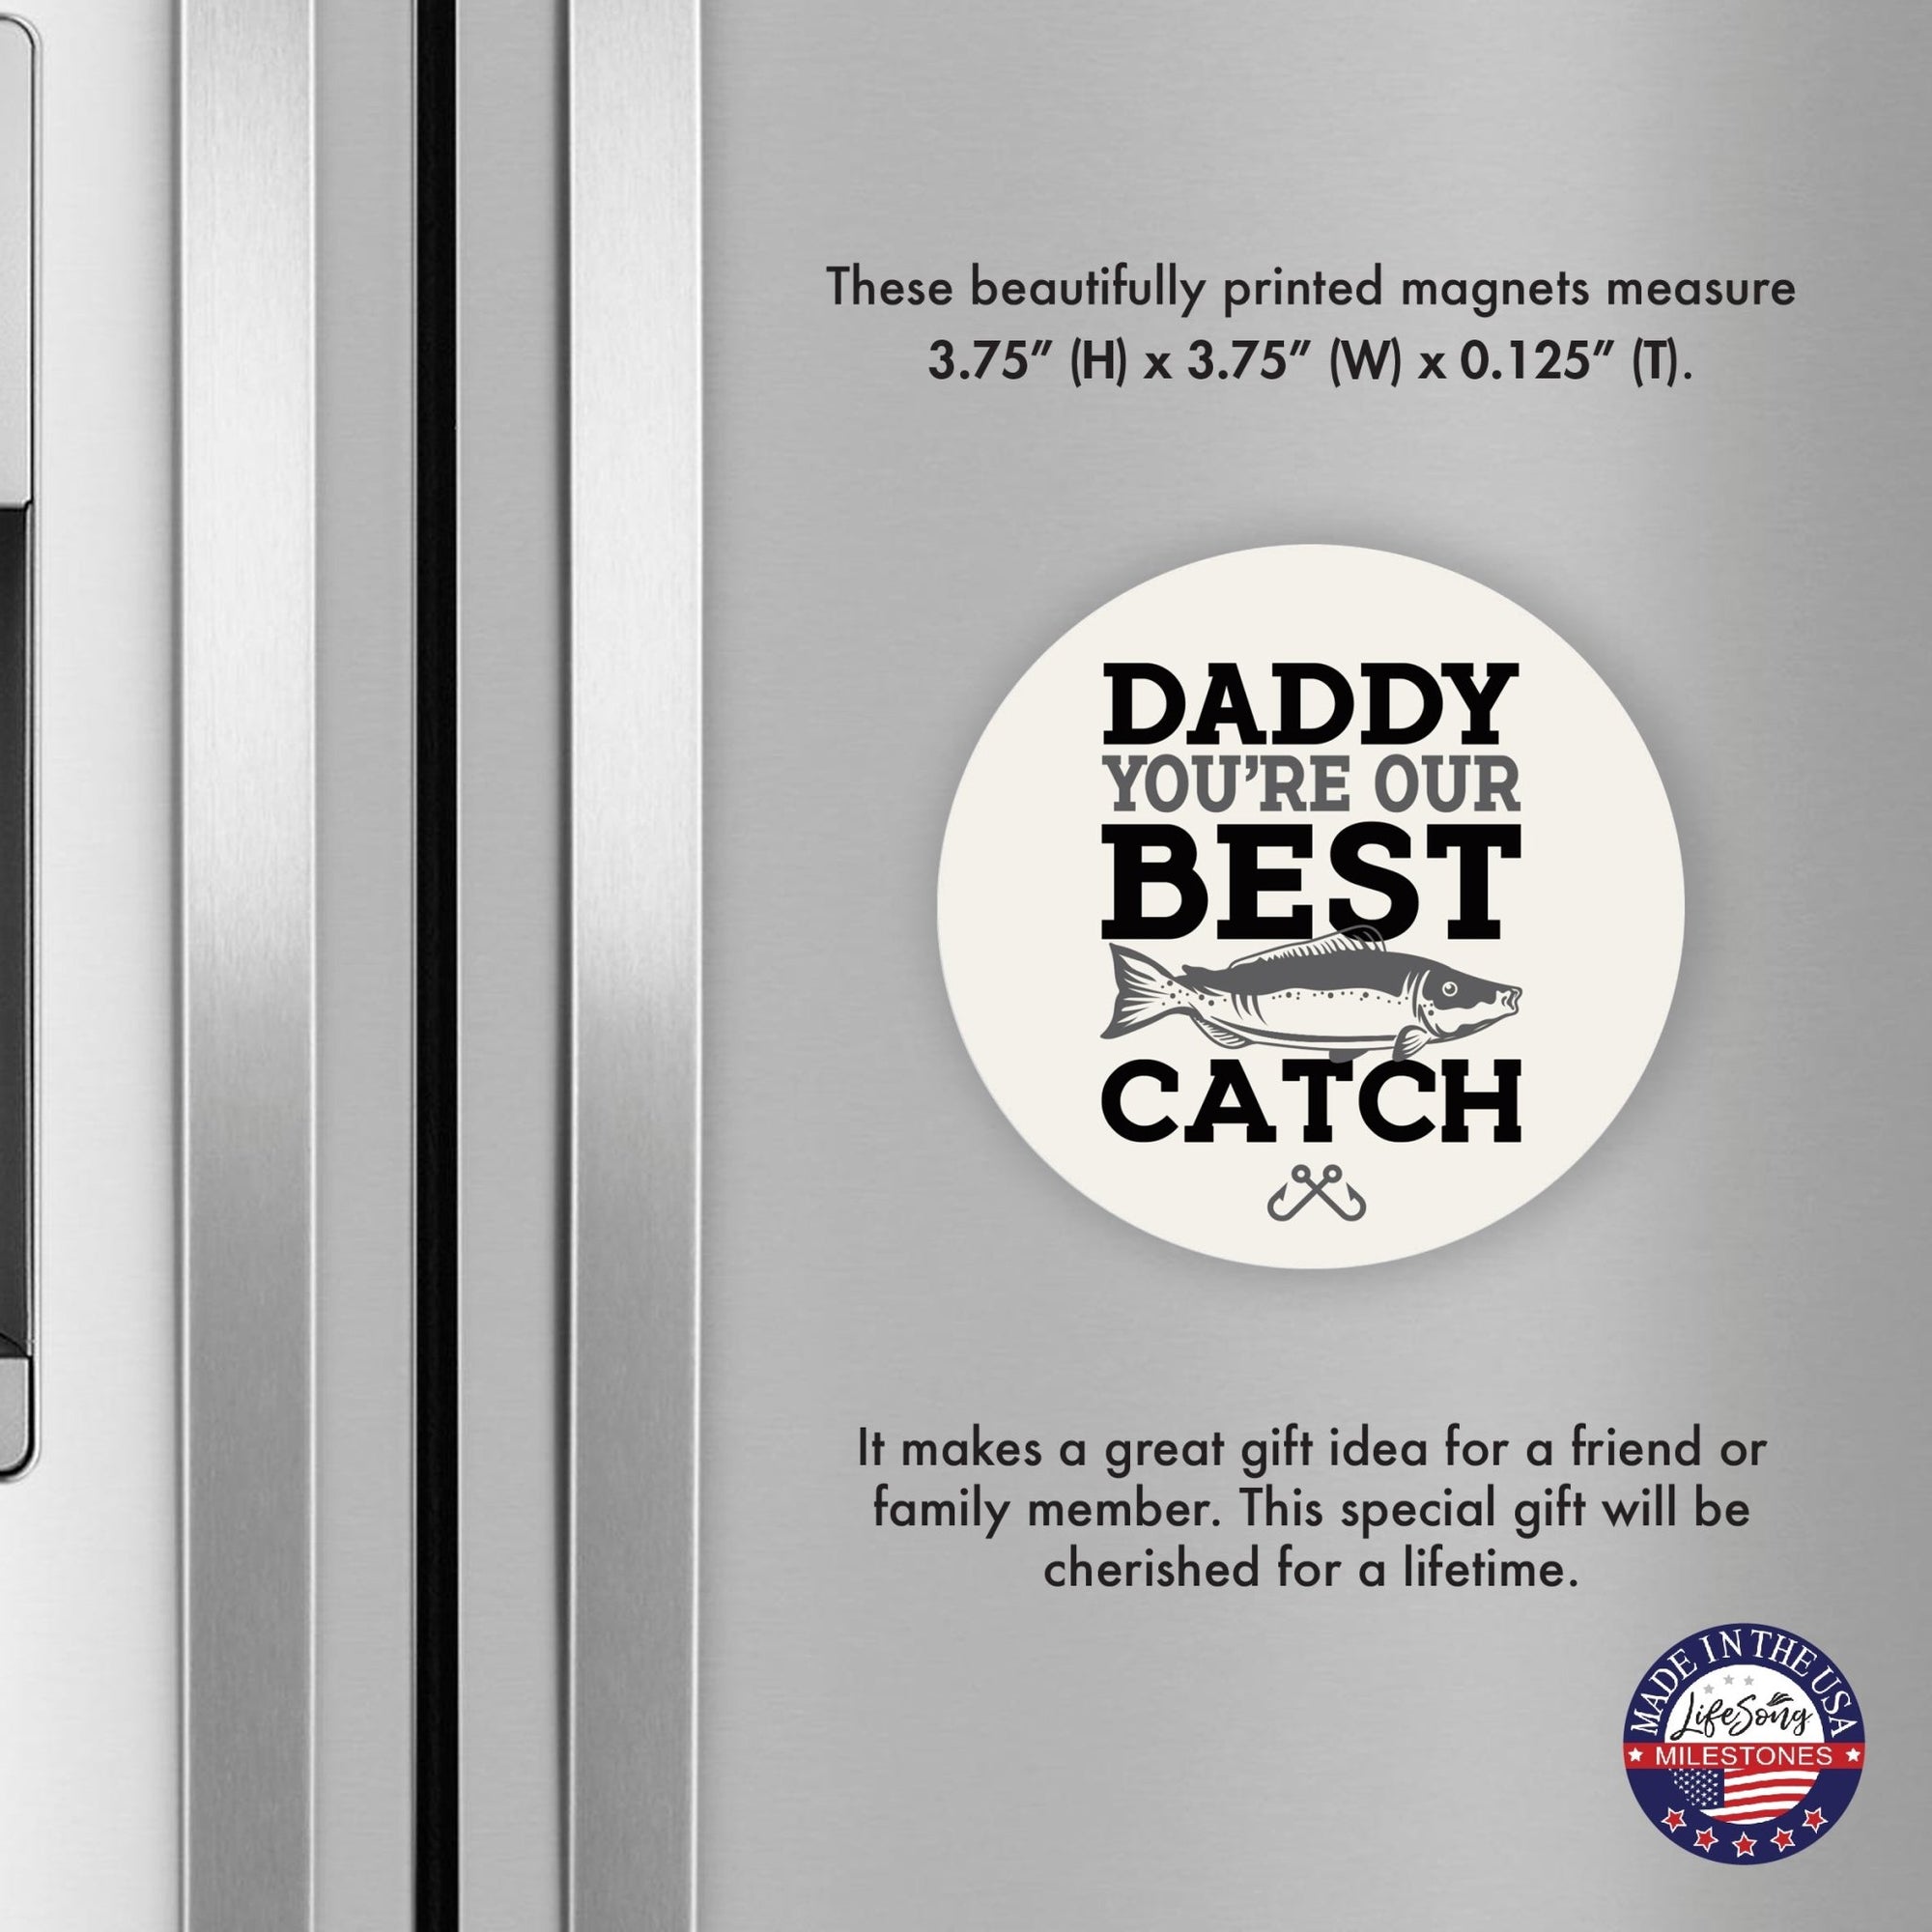 Modern Dad Refrigerator Magnet Gift - Your Best Catch - LifeSong Milestones